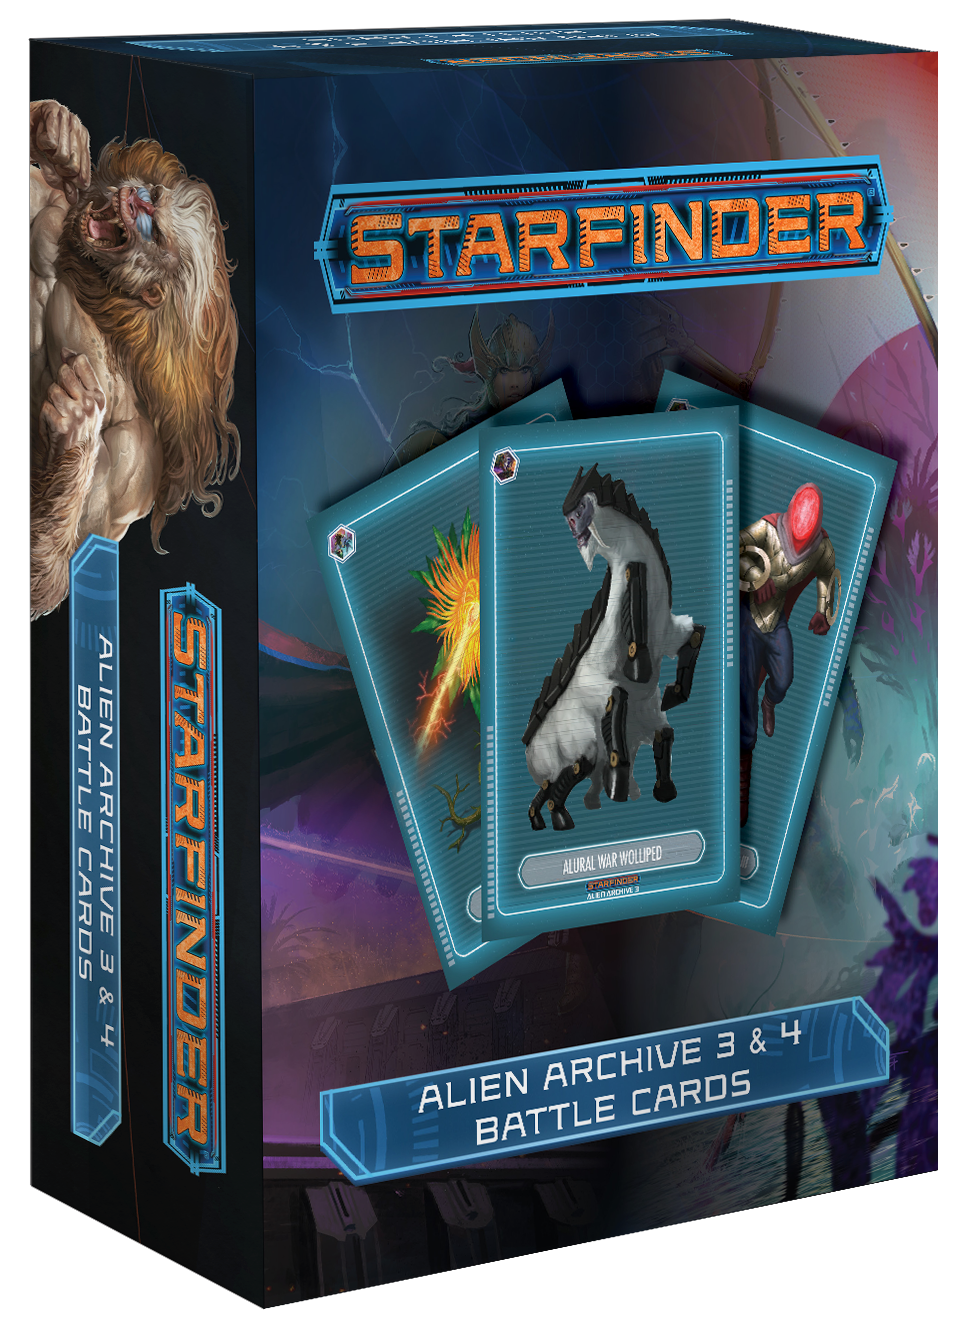 Starfinder: ALIEN ARCHIVE 3 AND 4 BATTLE CARDS 